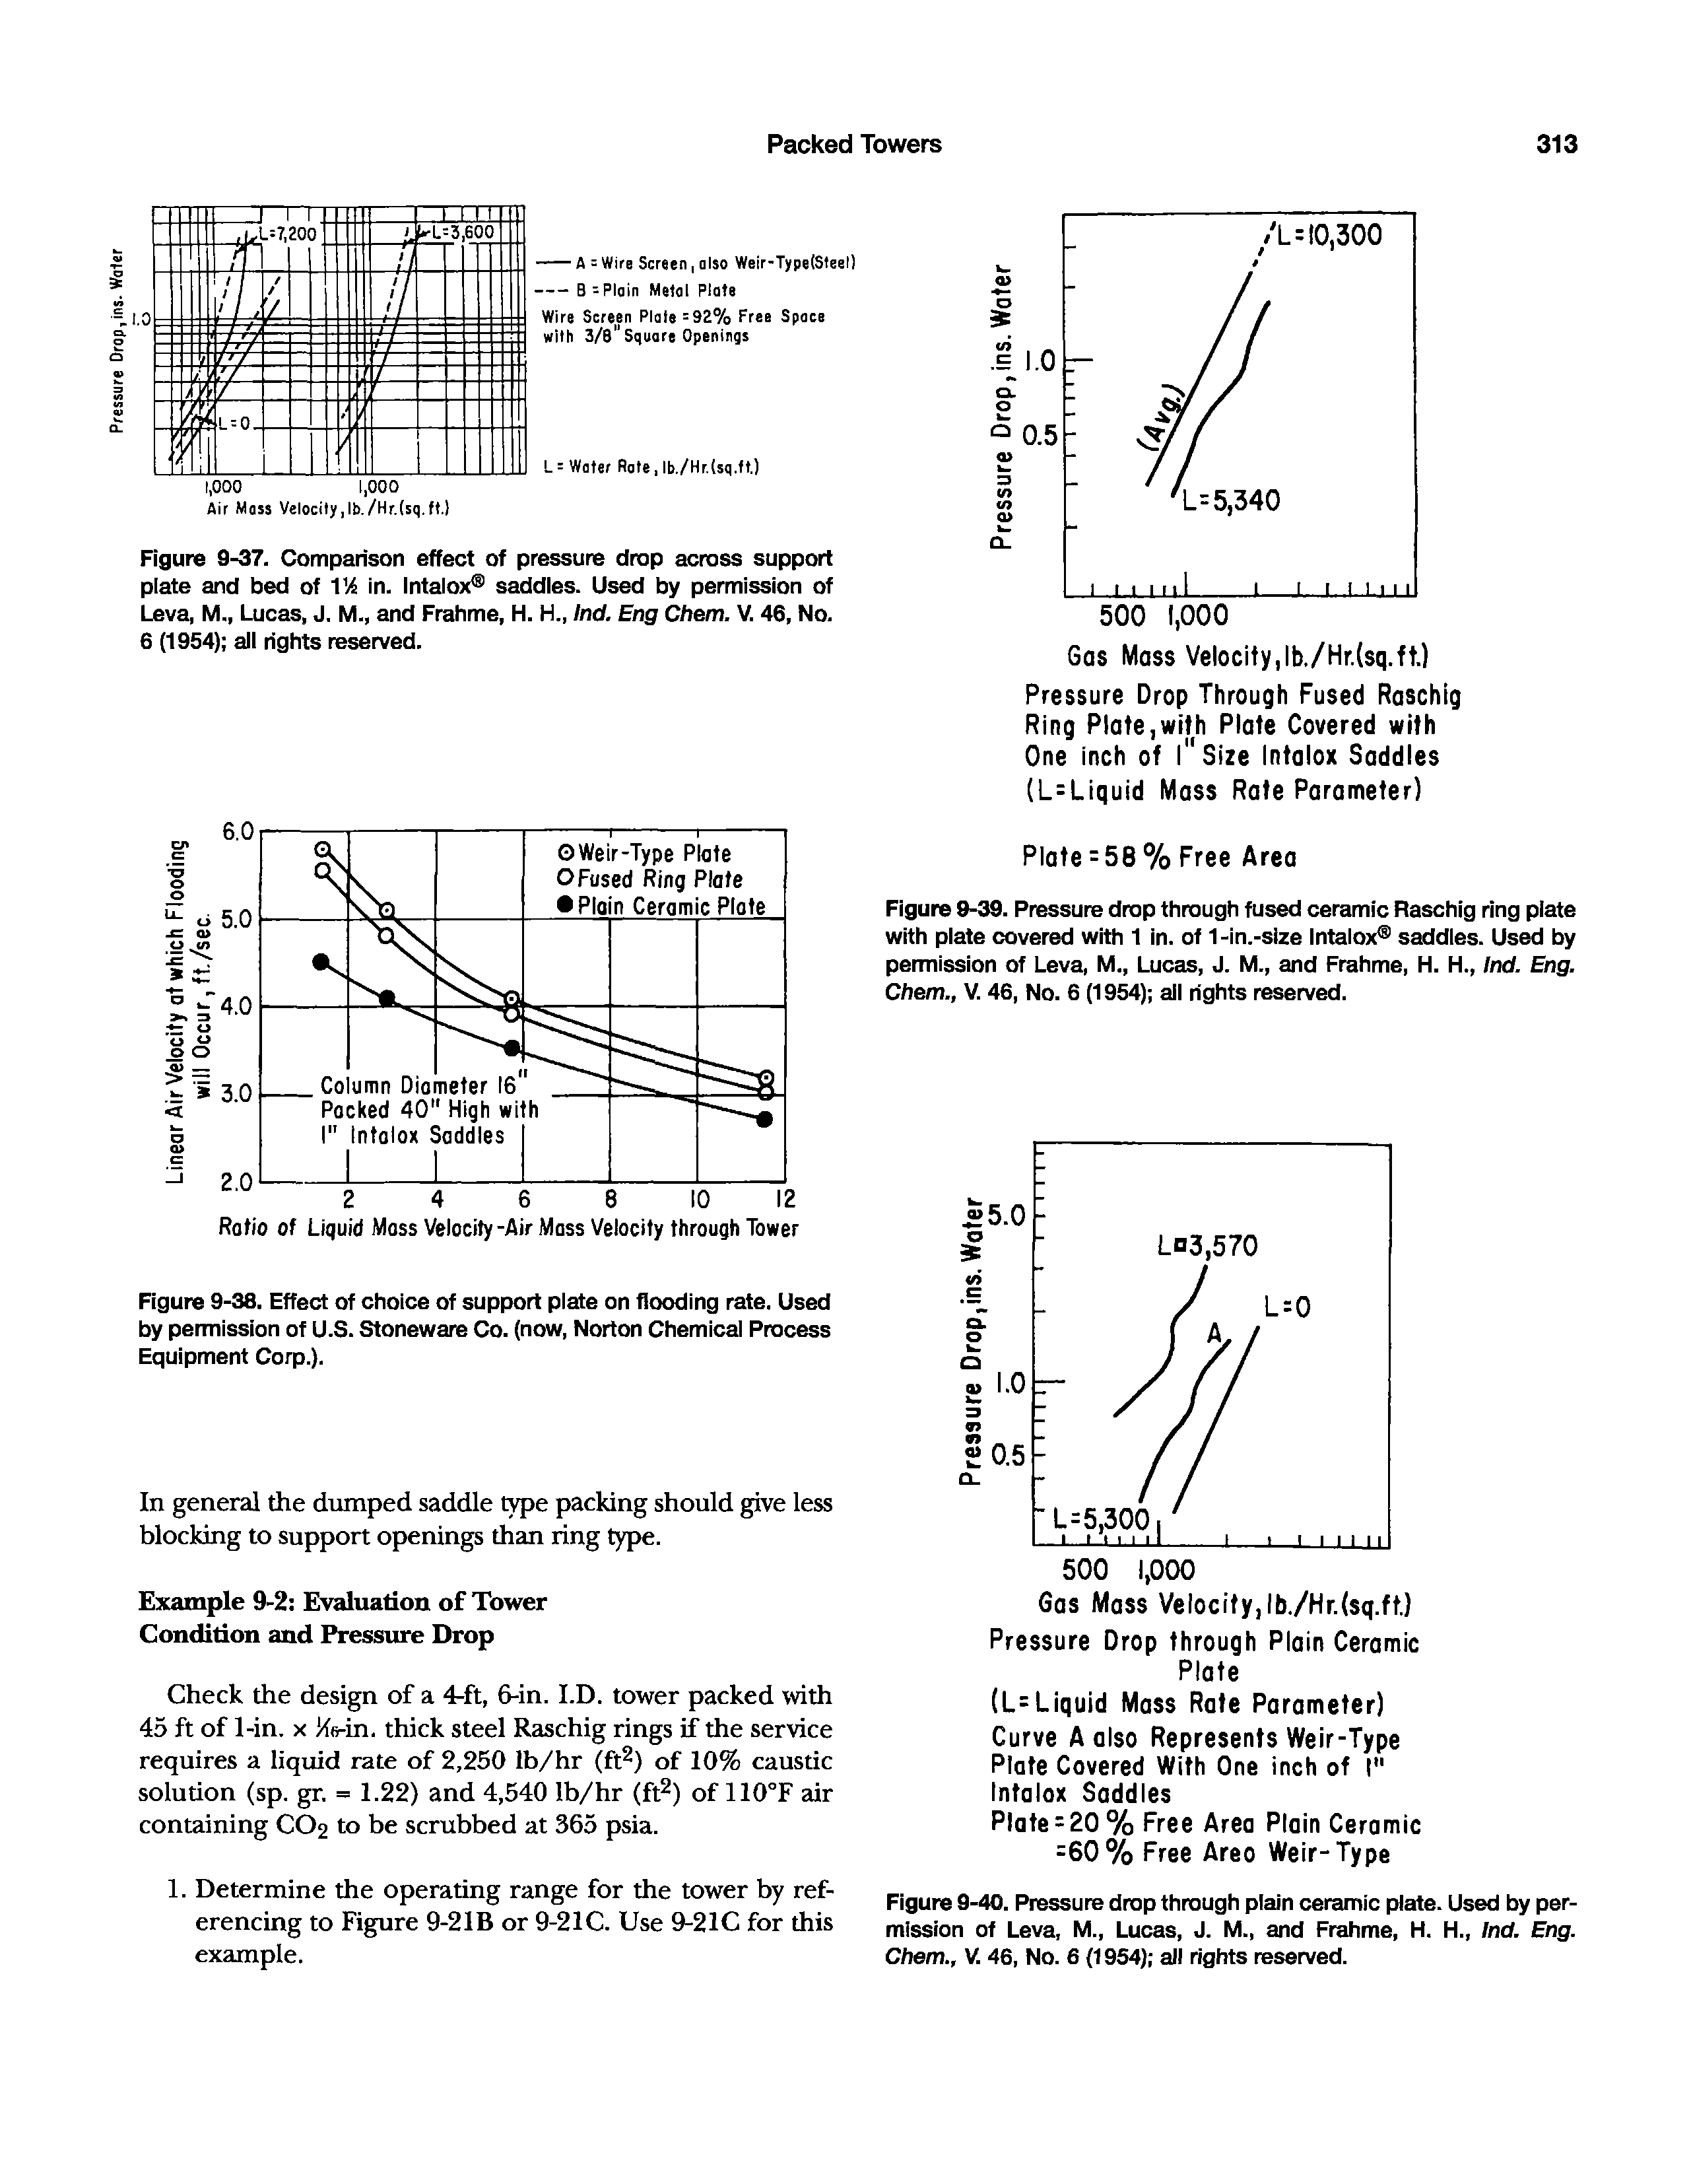 Figure 9-38. Effect of choice of support plate on flooding rate. Used by pennission of U.S. Stoneware Co. (now, Norton Chemical Process Equipment Corp.).